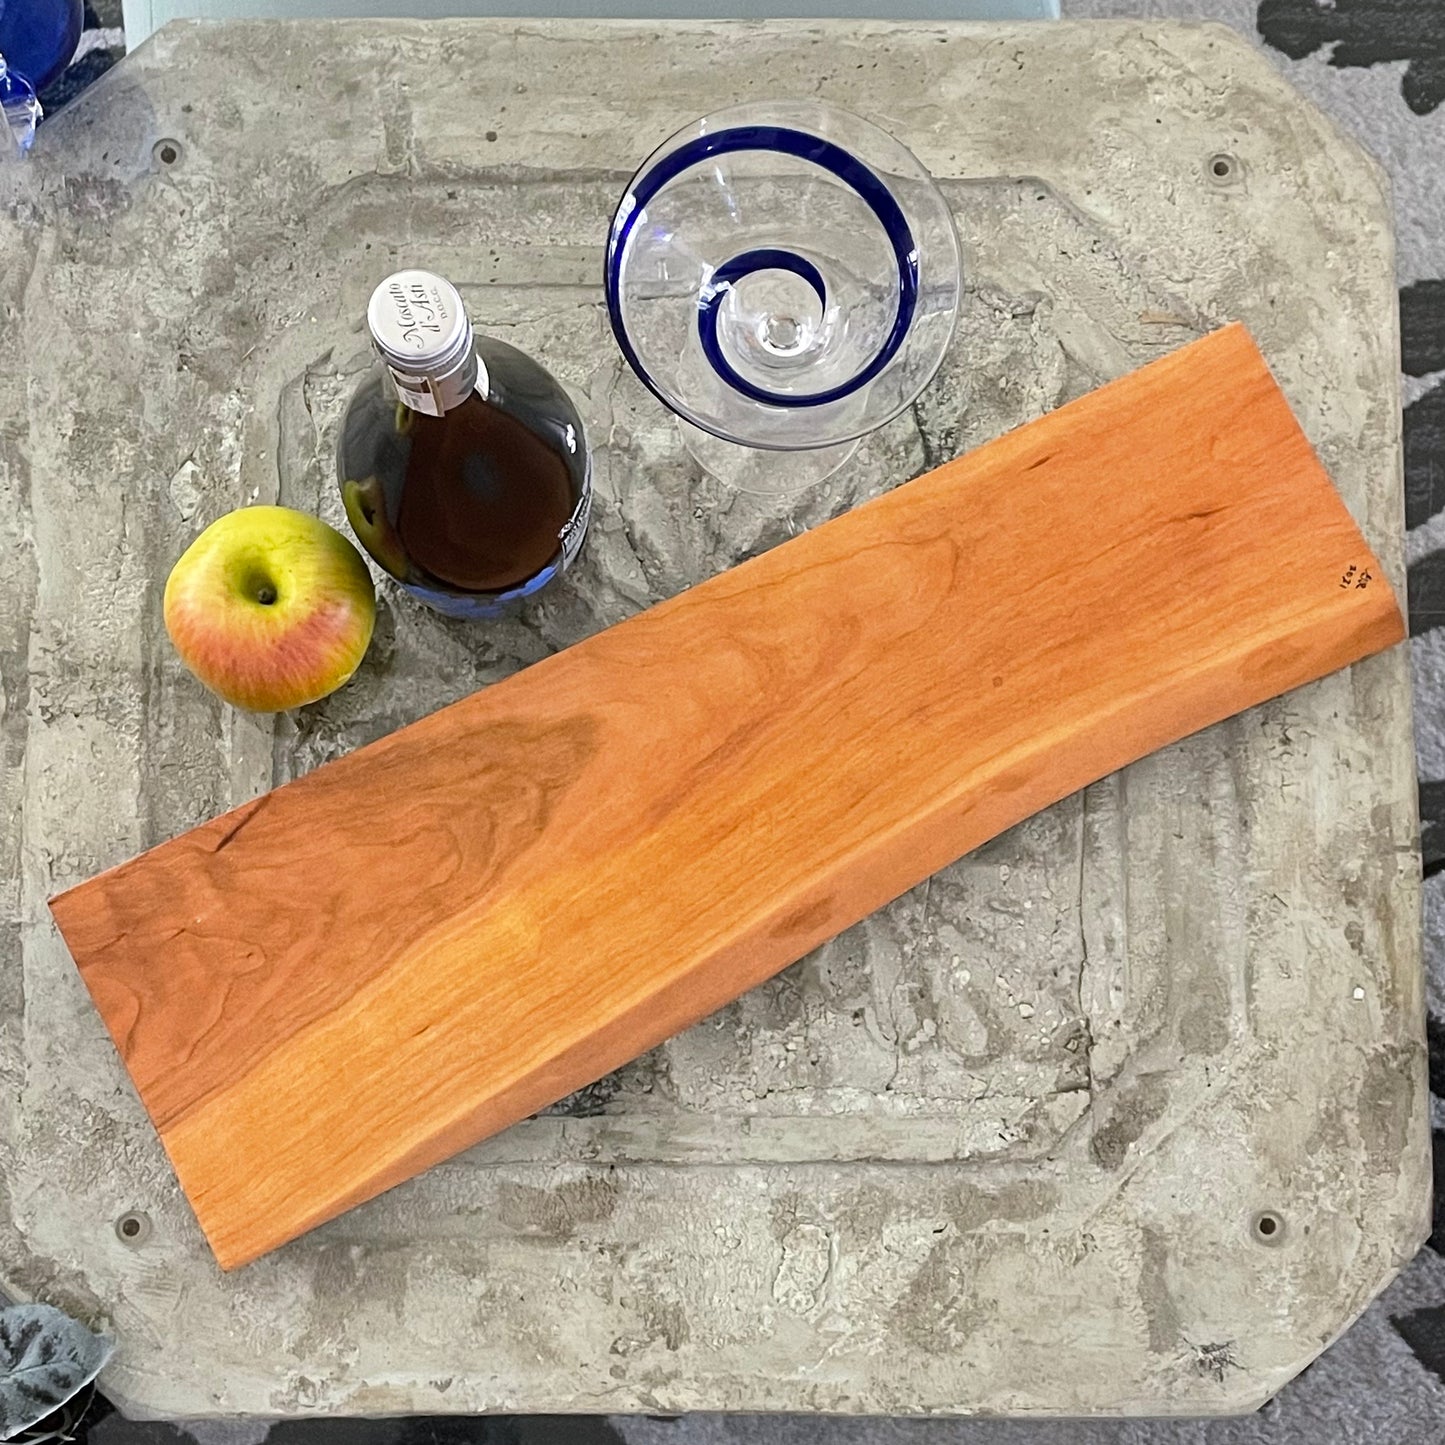 Live Edge White Oak Wood Charcuterie Board Long Rectangular/20-22" Hand Crafted Entertaining Party Hosting Holiday Gift Idea Housewarming